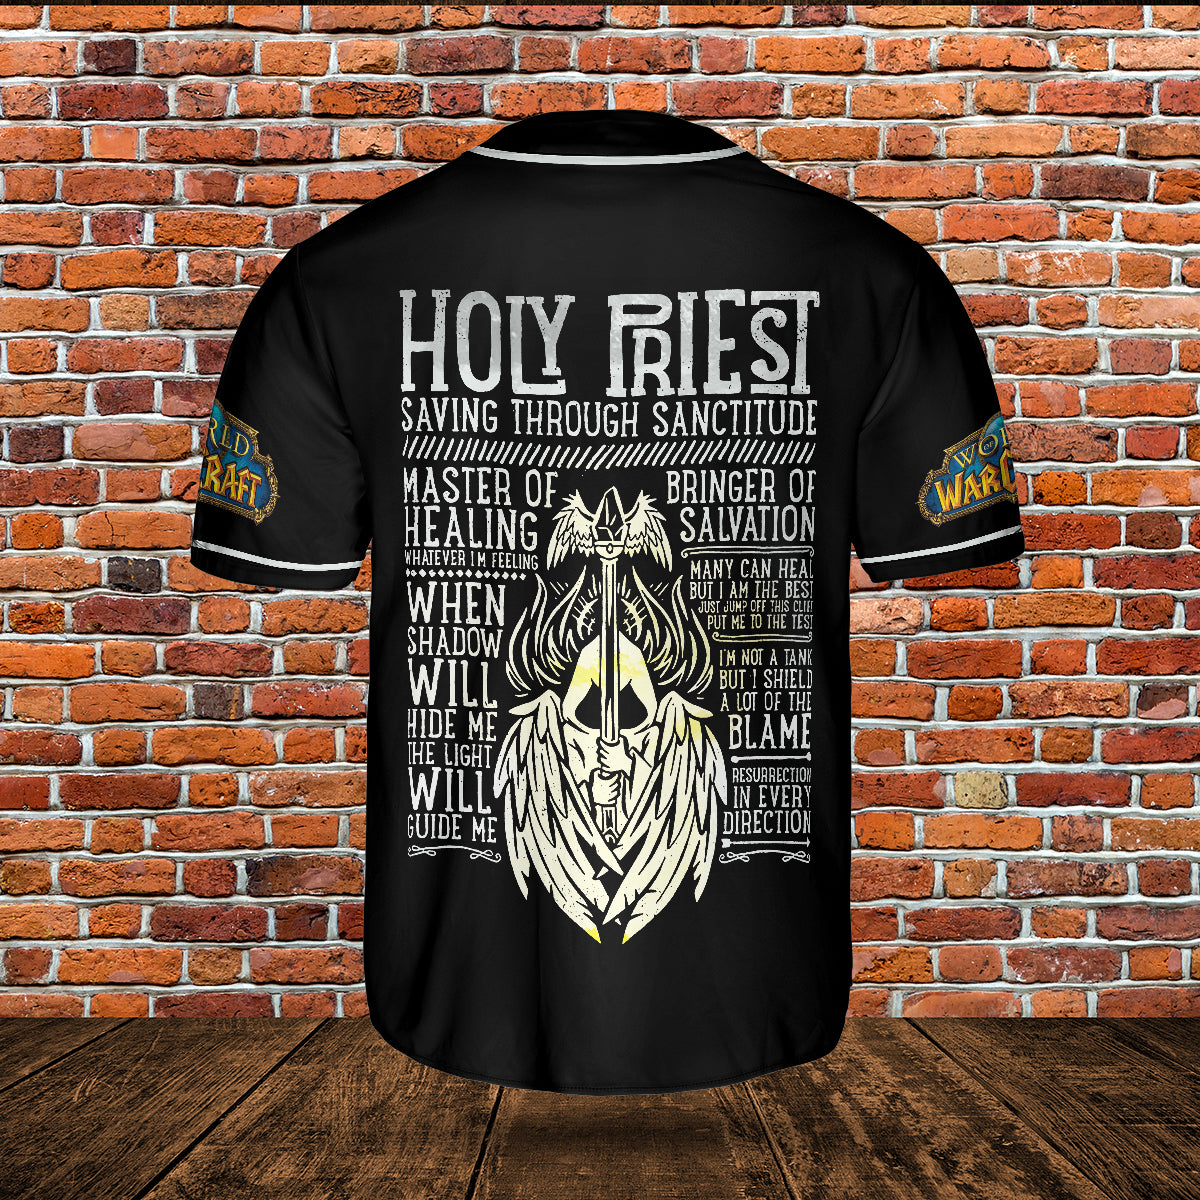 Holy Priest Wow Collection AOP Baseball Jersey